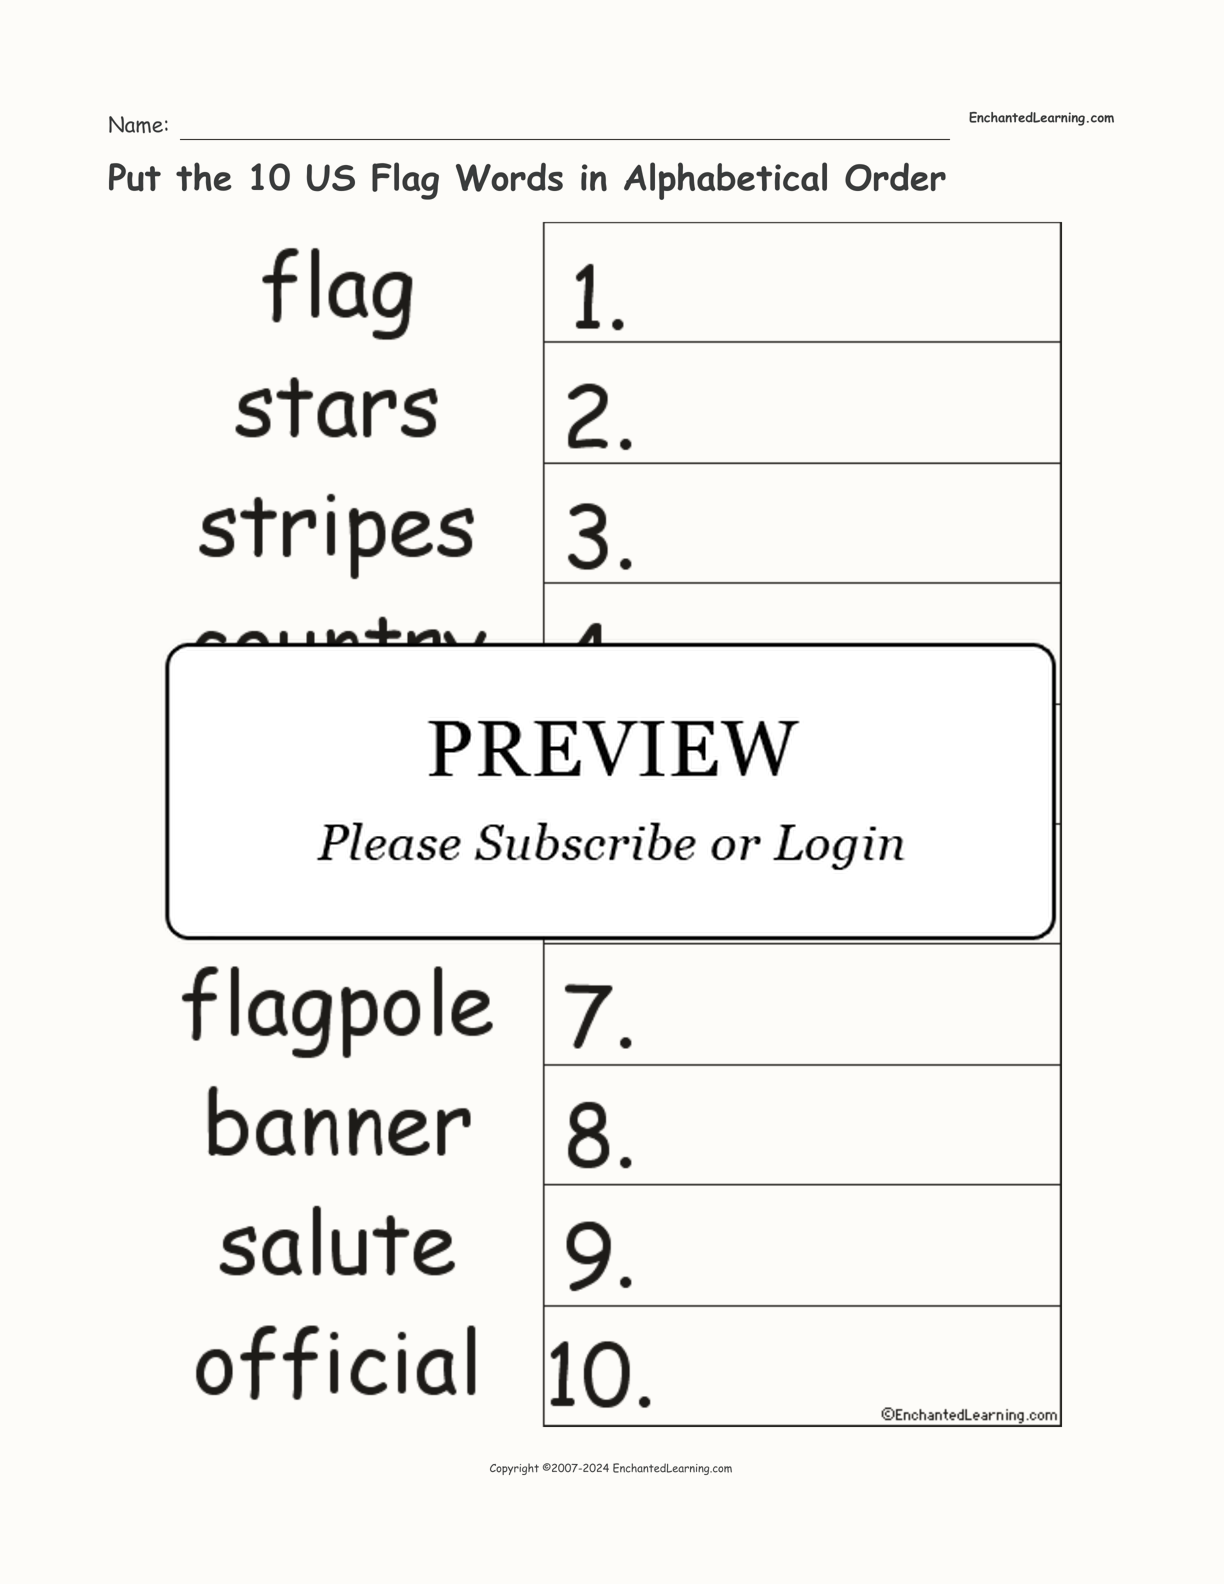 Put the 10 US Flag Words in Alphabetical Order interactive worksheet page 1